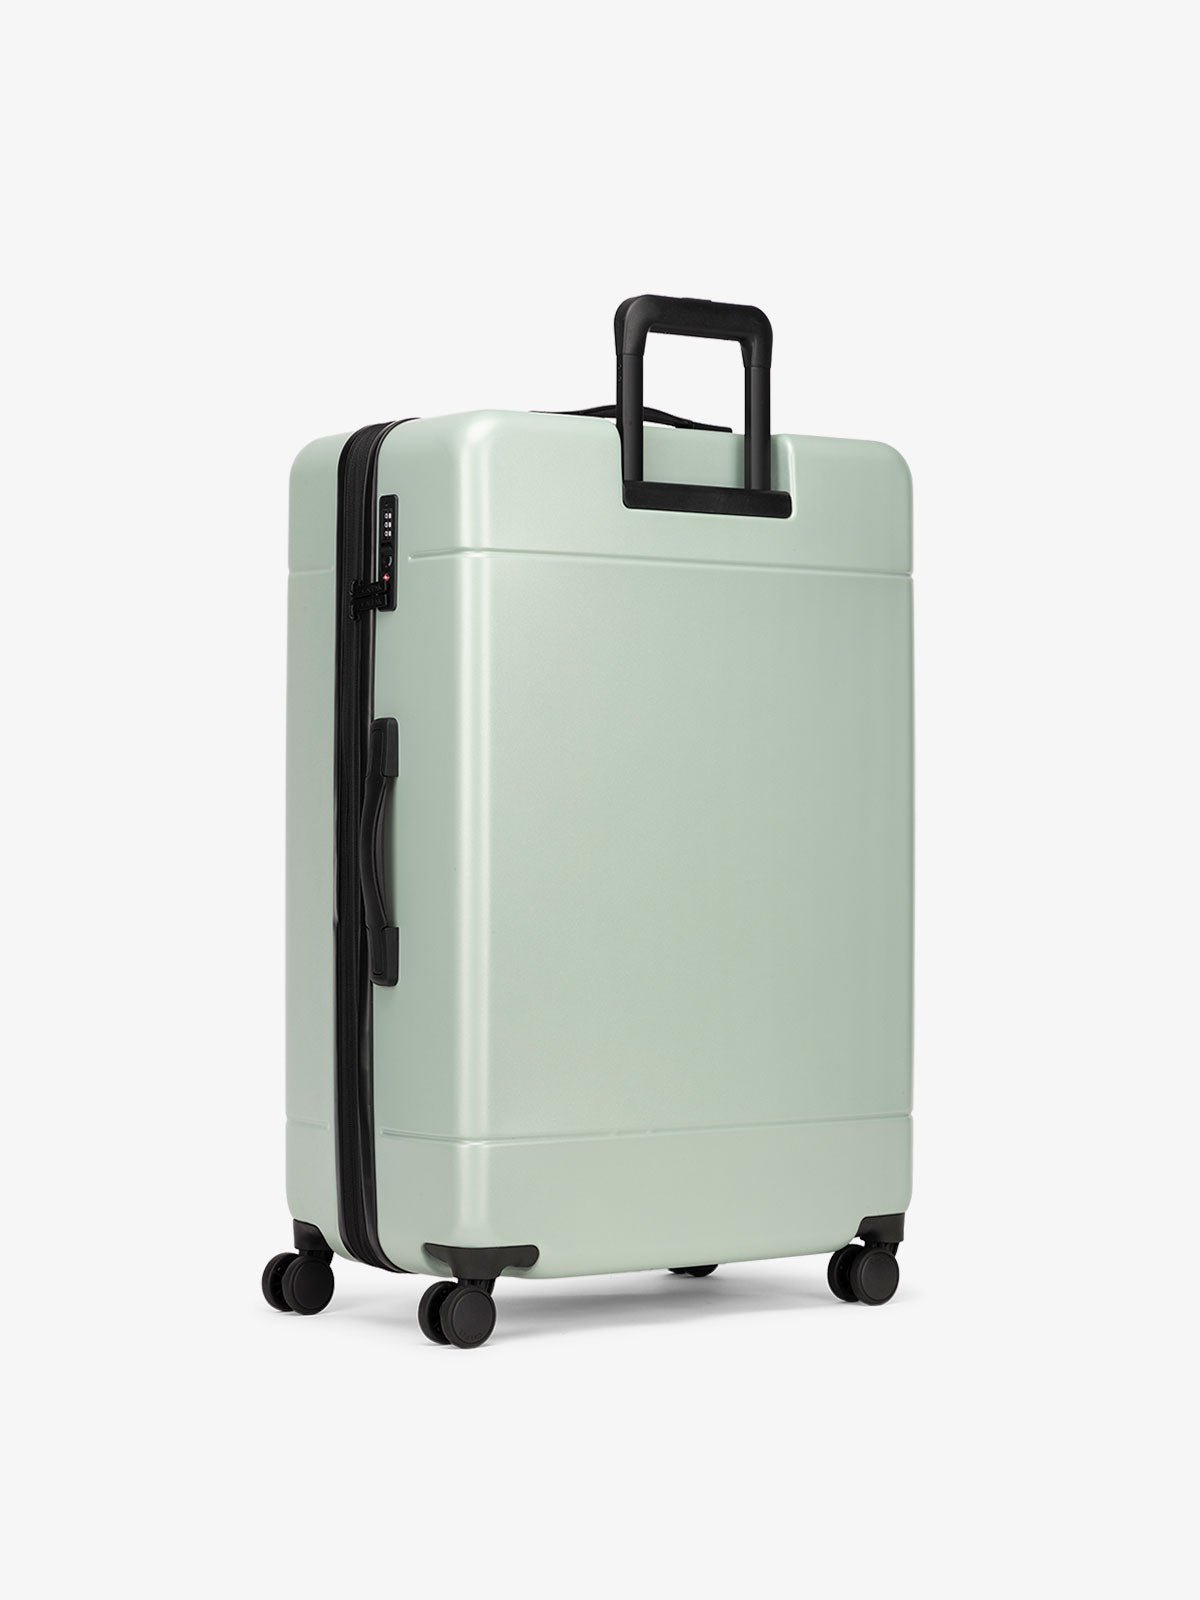 Hue large 28 inch durable hard shell polycarbonate luggage in light green jade